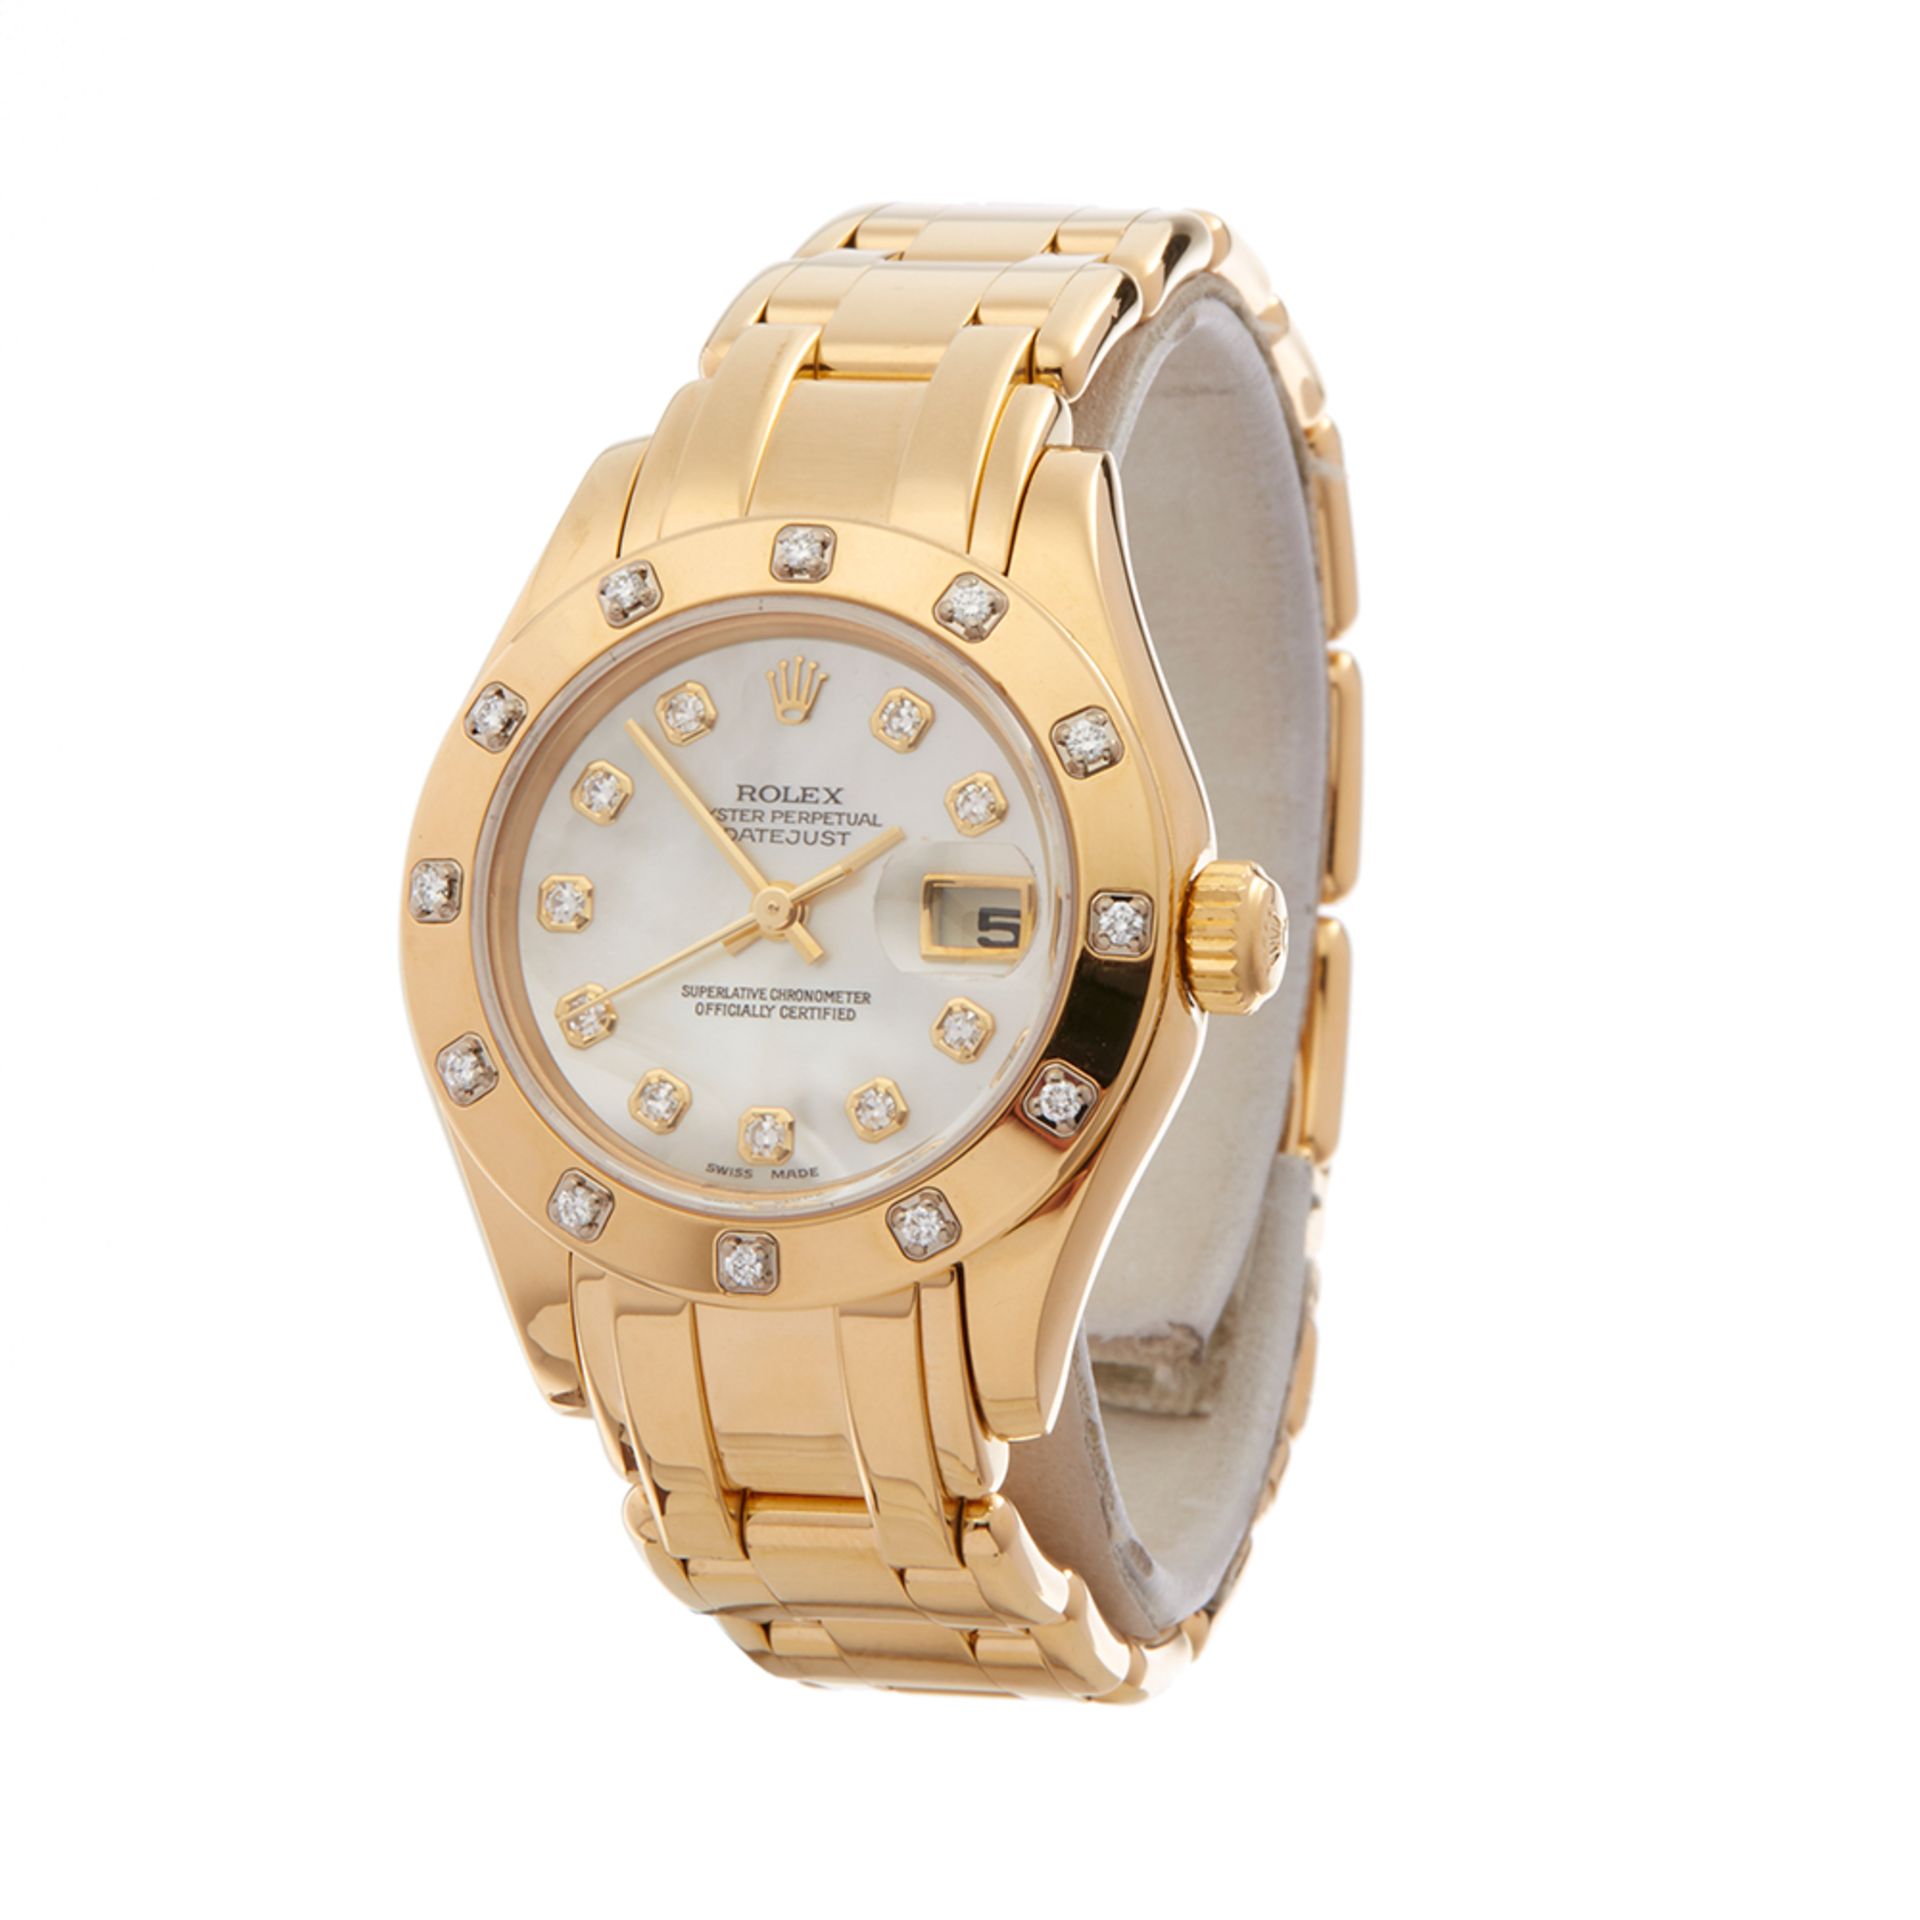 Rolex Pearlmaster 29 18K Yellow Gold - 80318 - Image 3 of 7